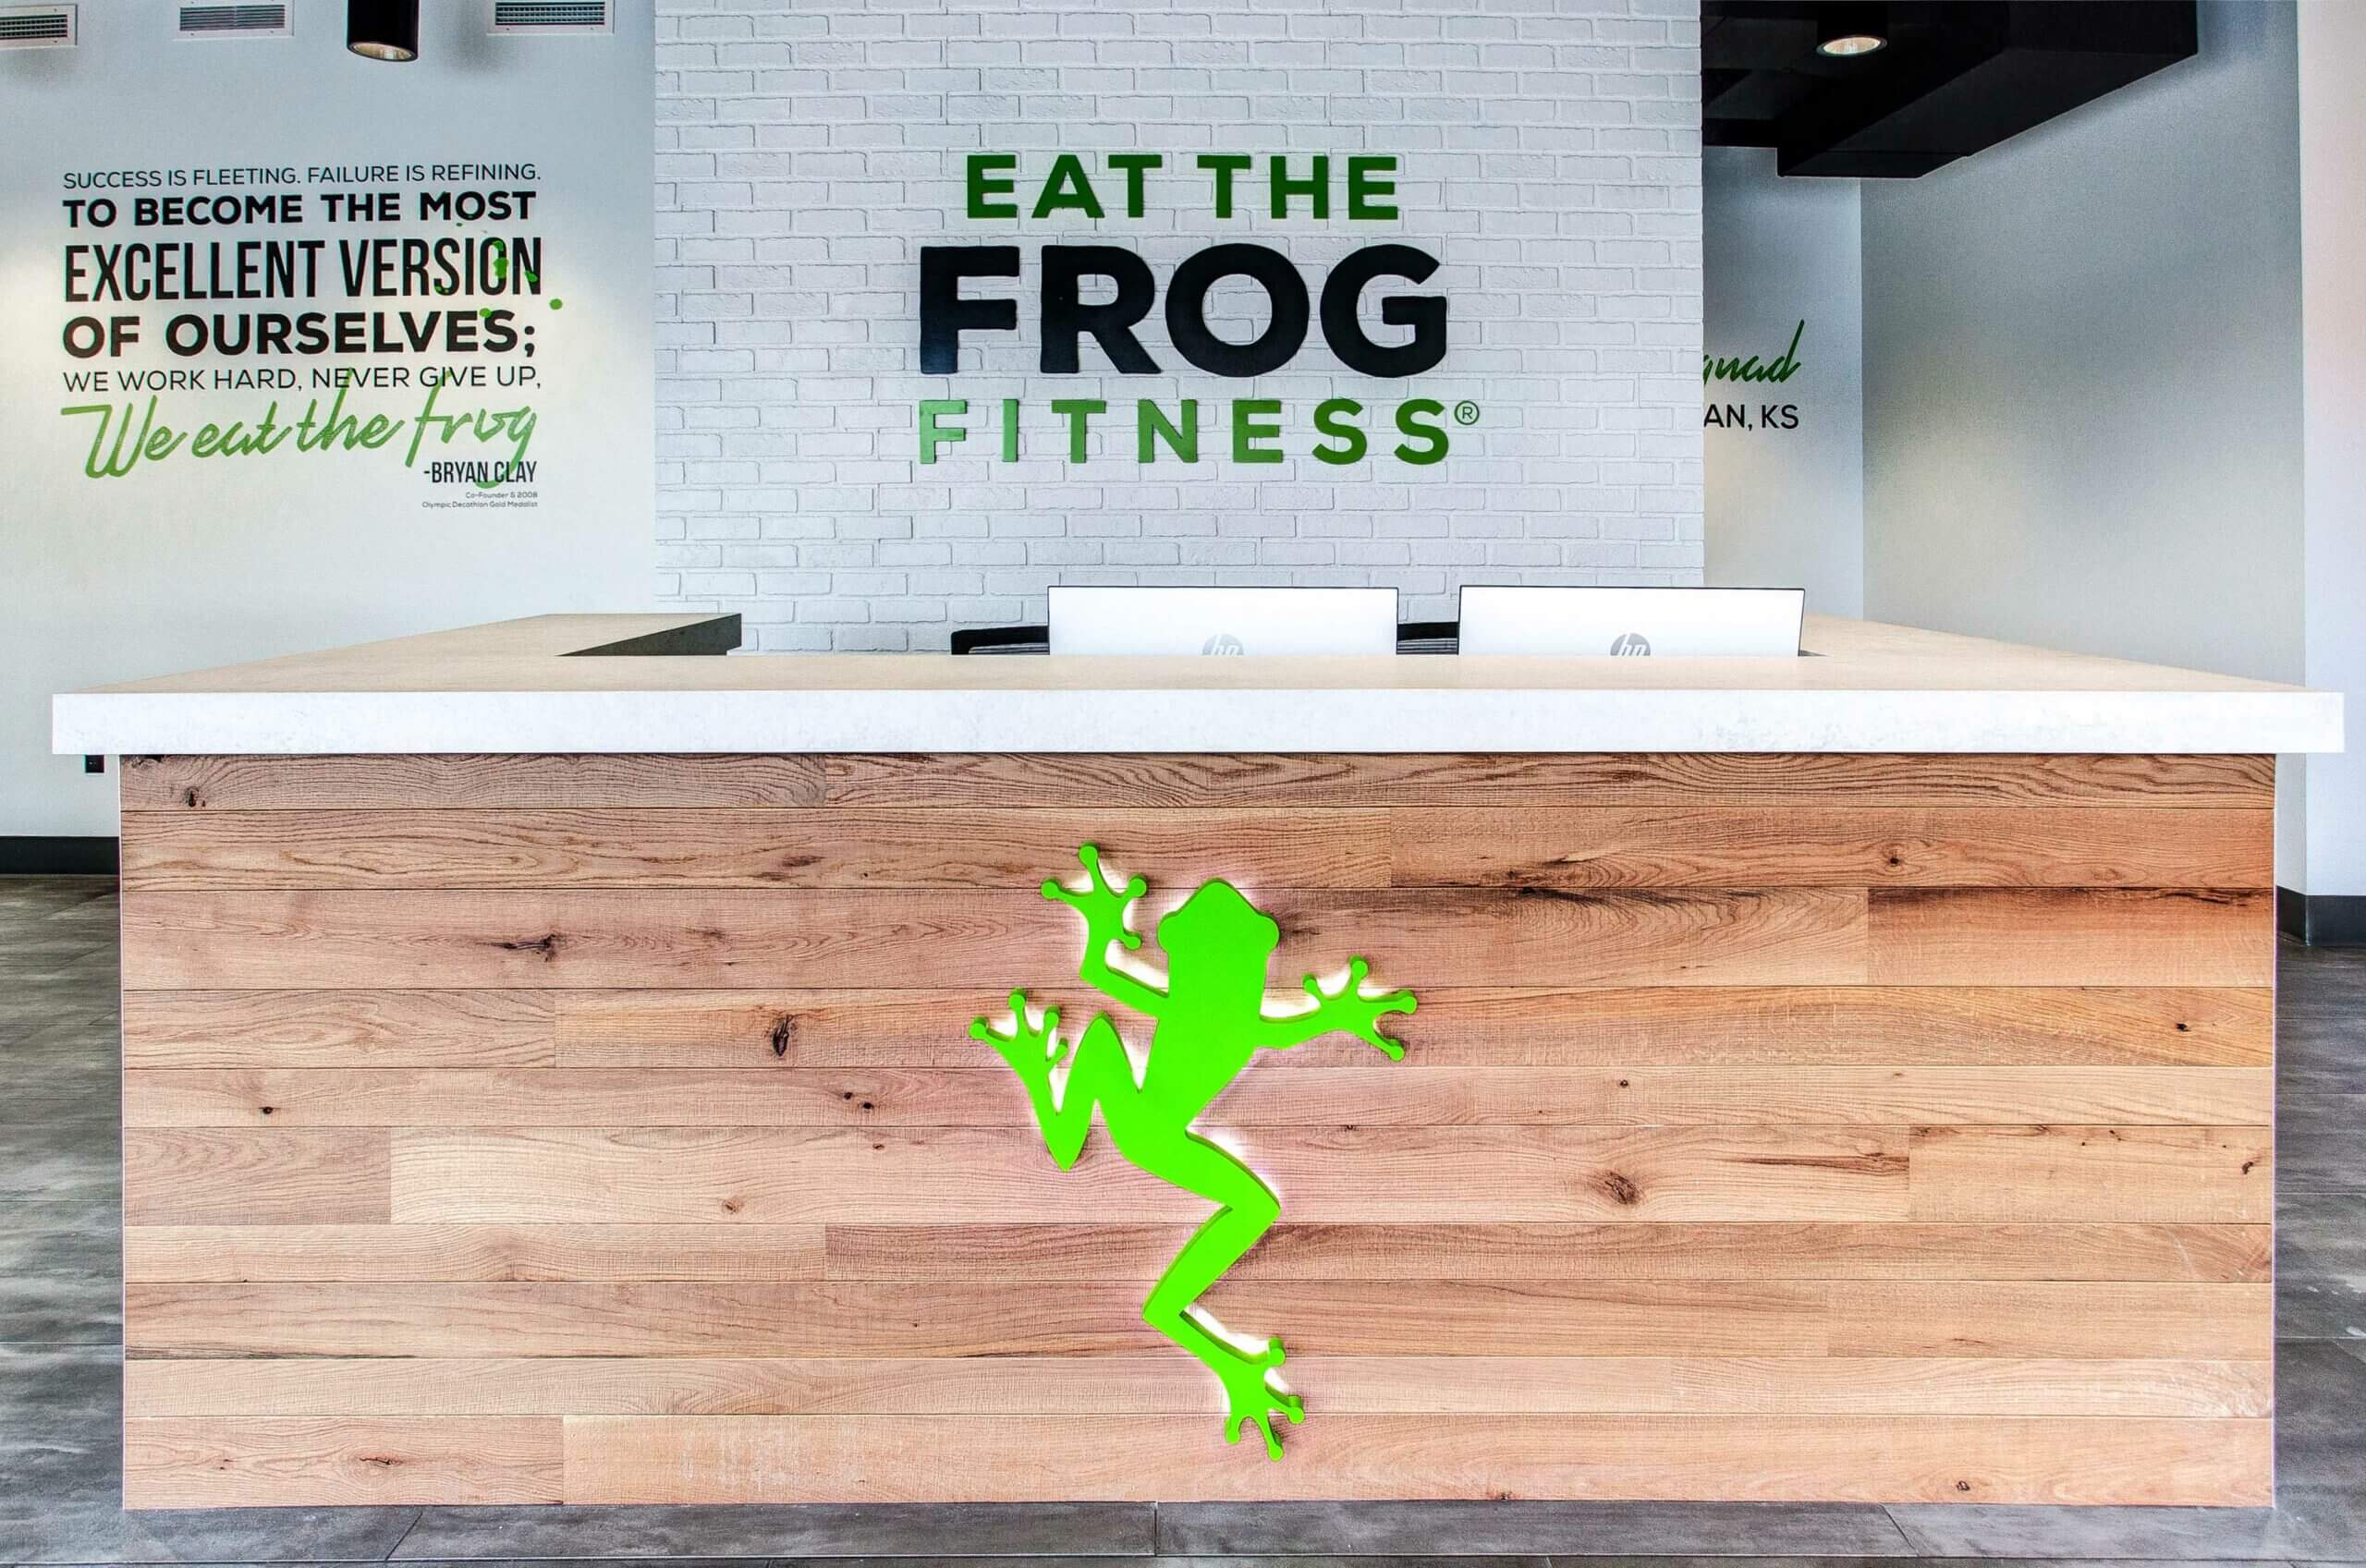 Eat the Frog Fitness